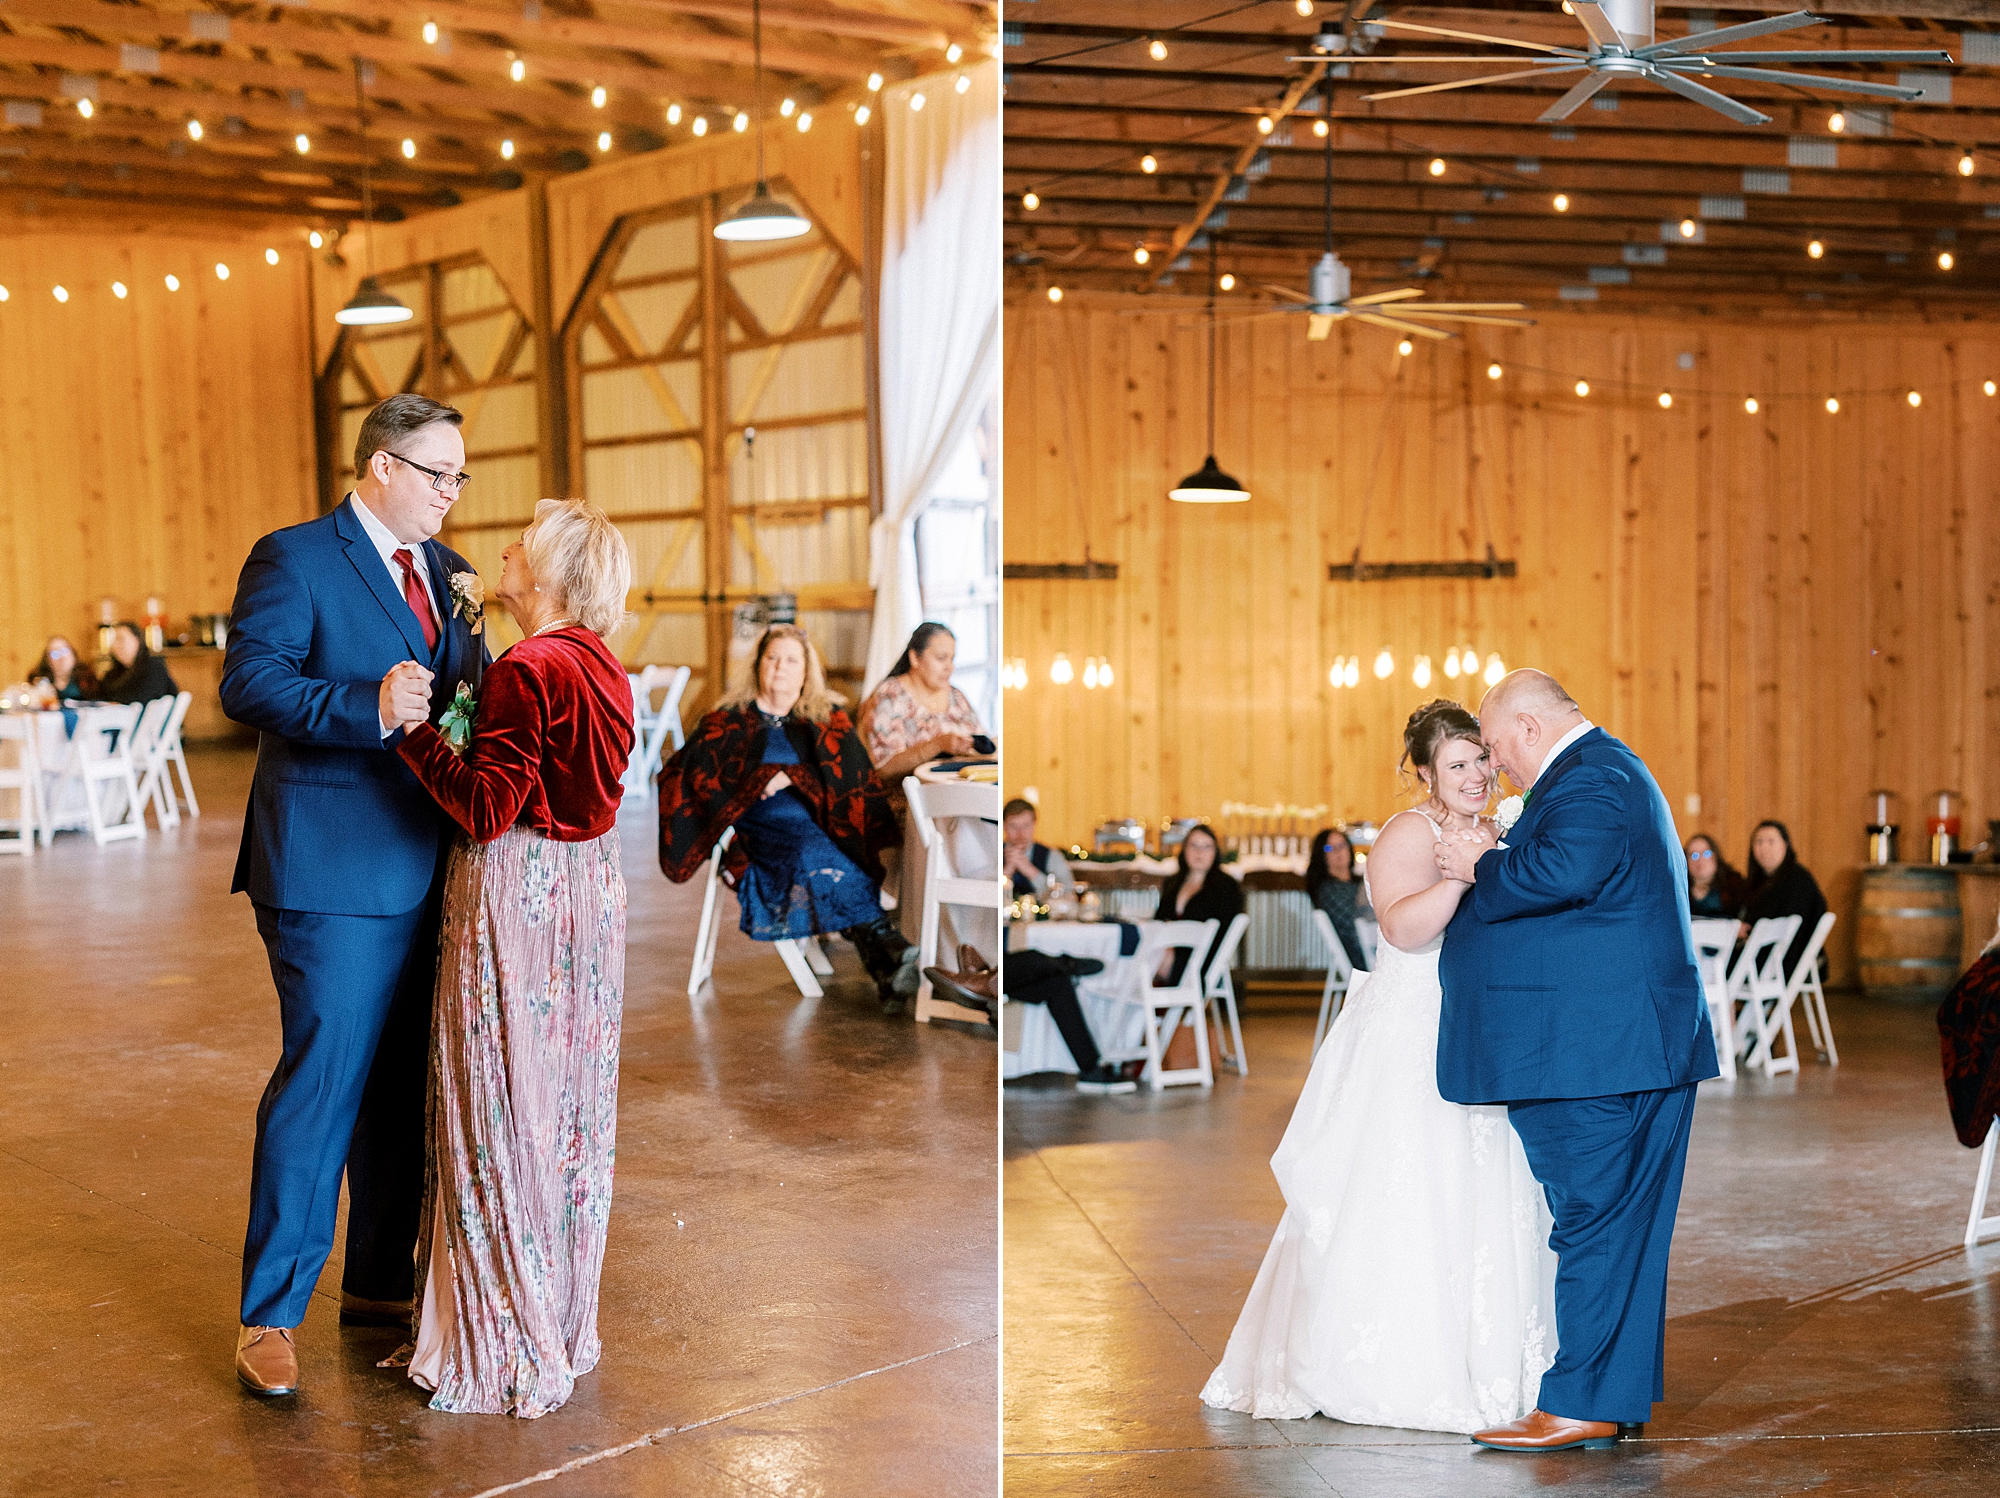 bride and groom dance with parents during NC wedding reception in barn